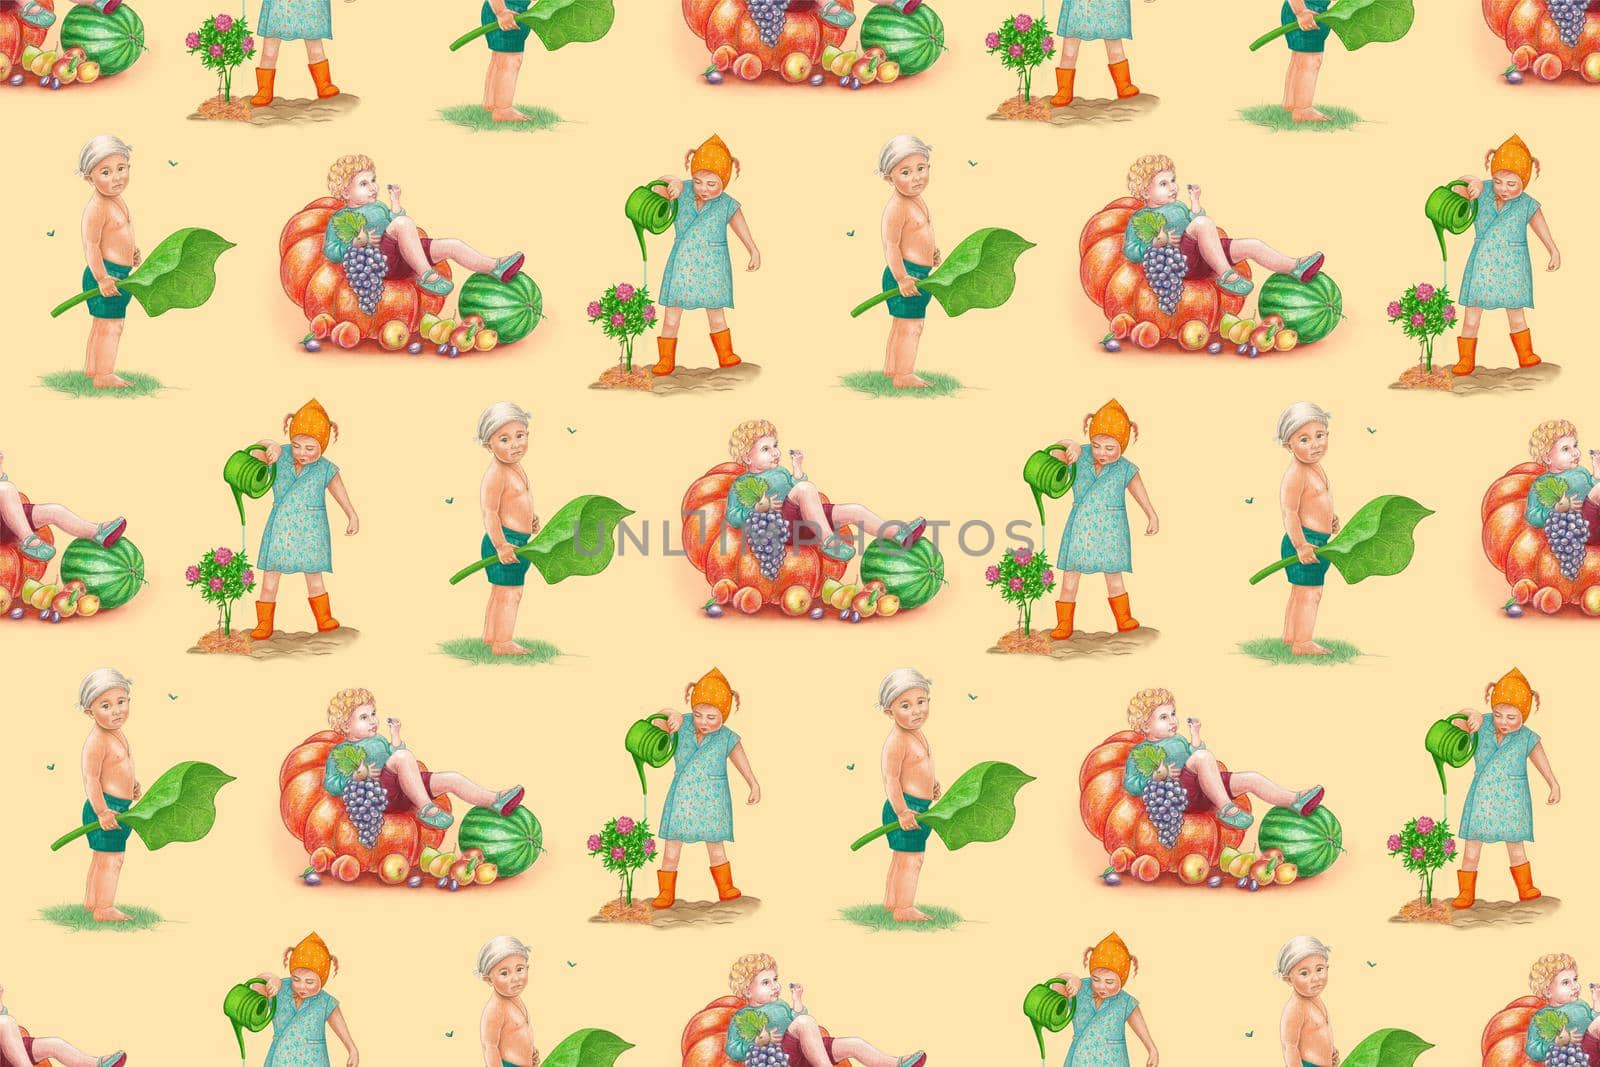 Seamless pattern. Summer. Children in various poses, eating fruits, watering flowers, playing barefoot. Watercolor style on a yellow background.